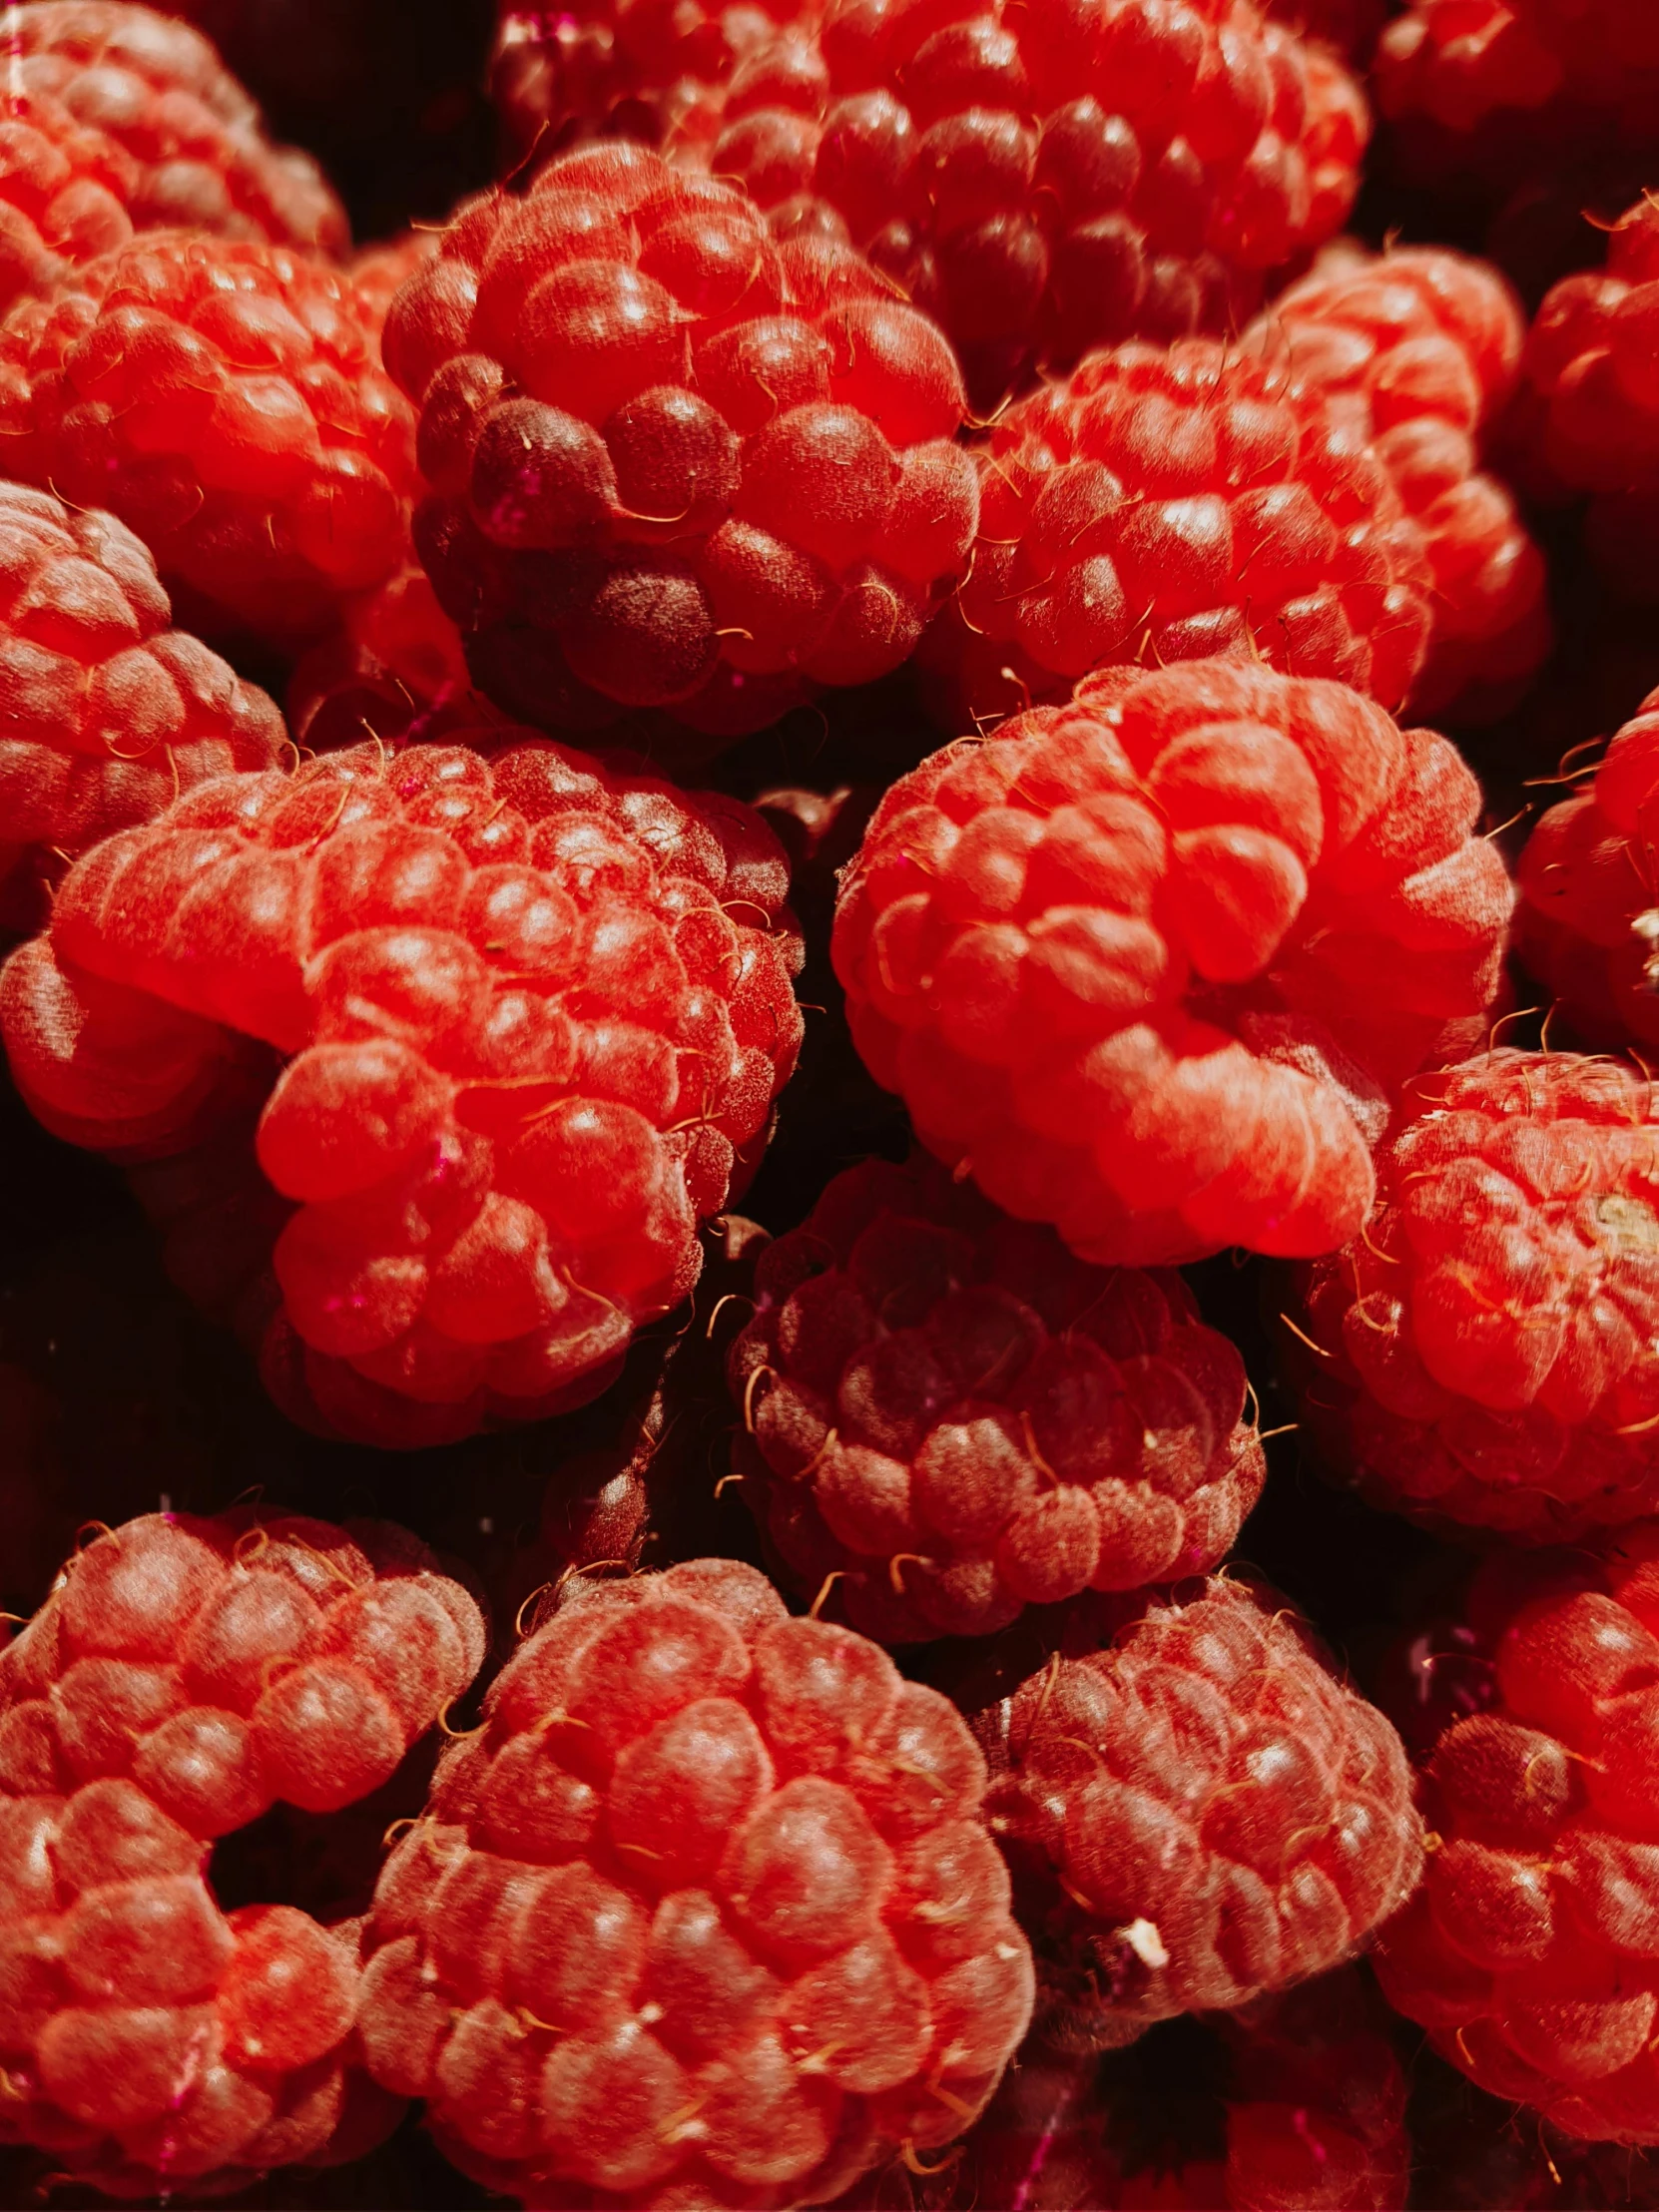 there are very many raspberries still on the fruit